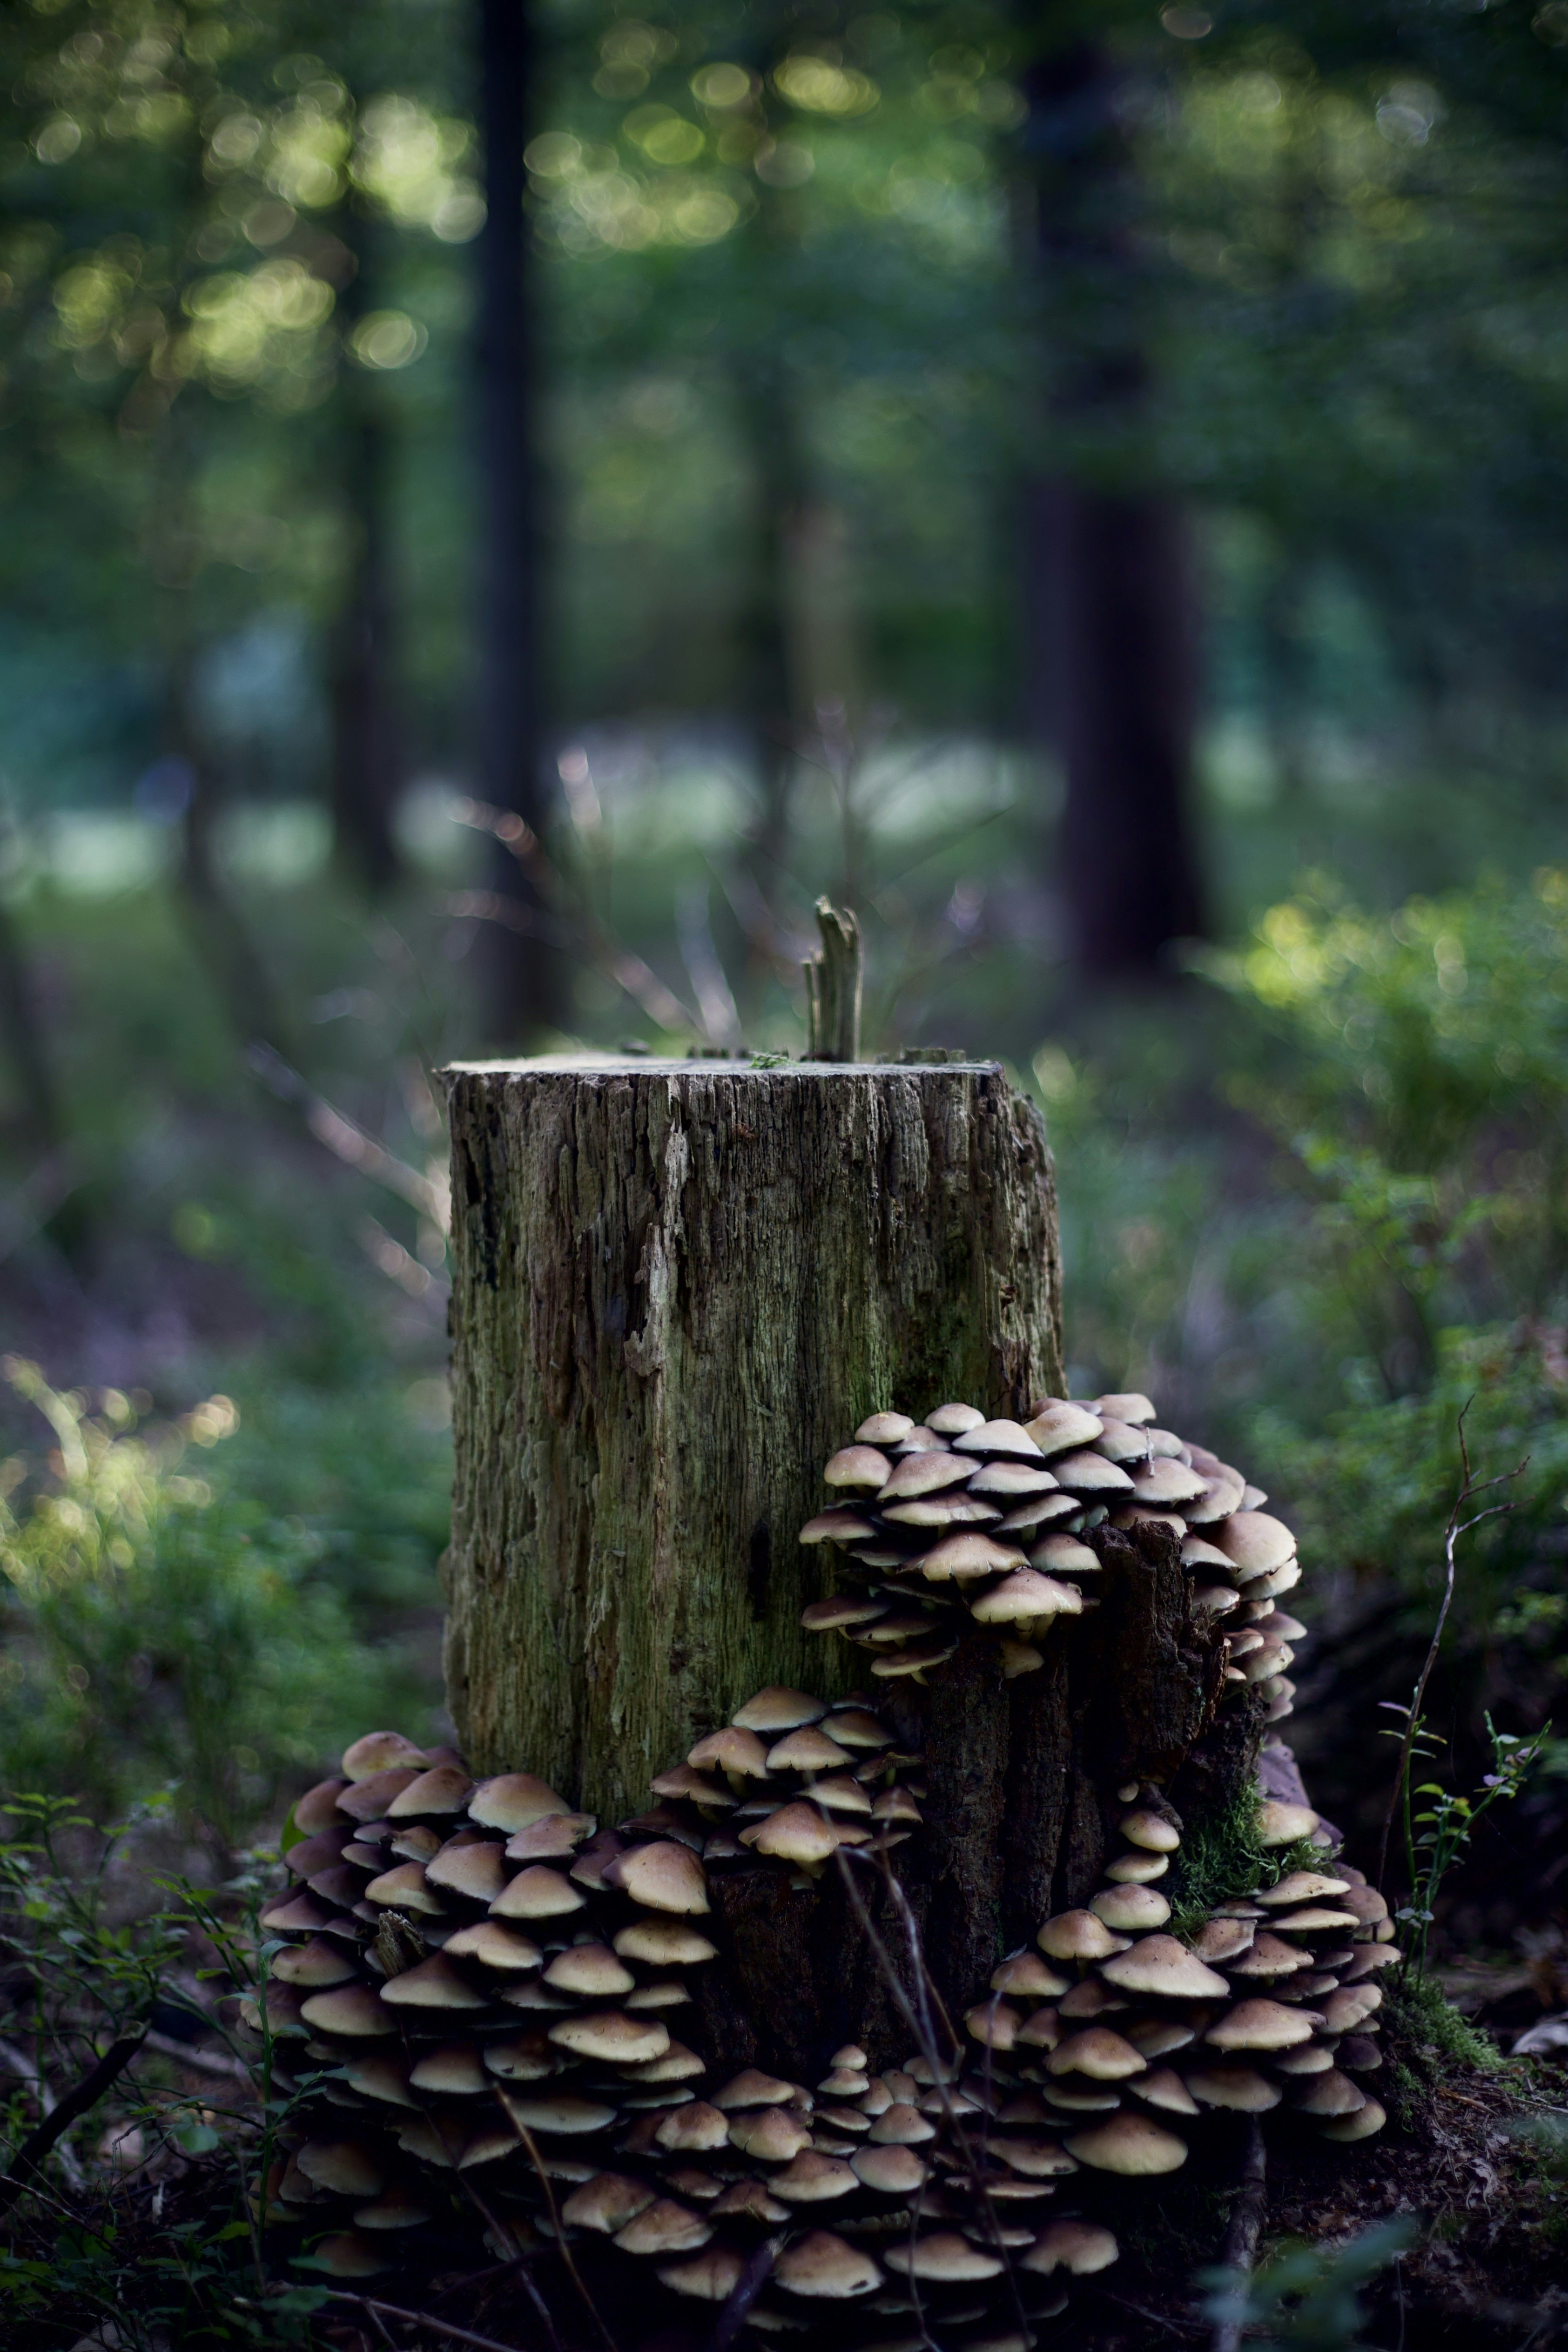 Mushroom family in the forest